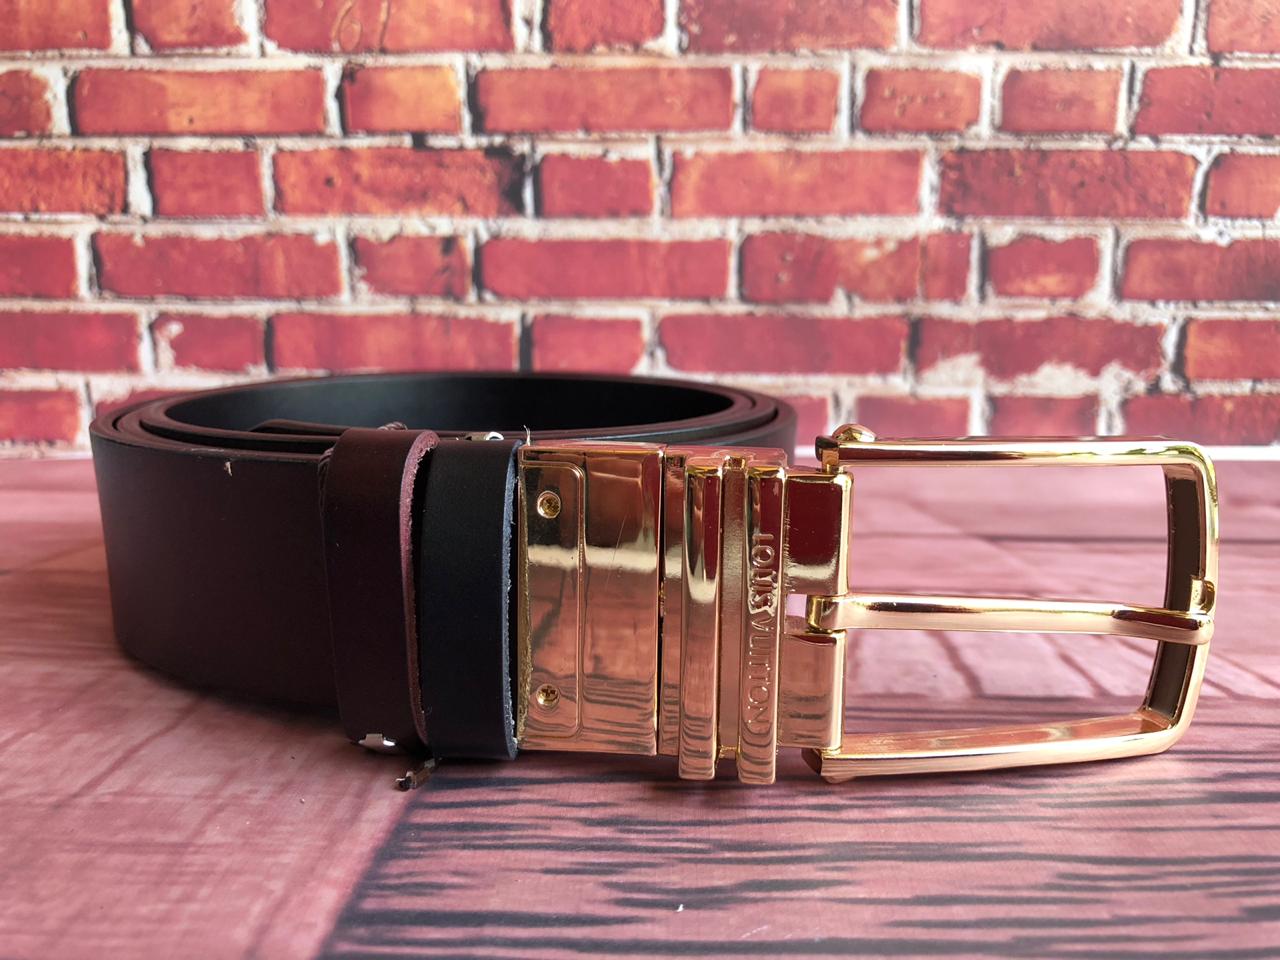 FunkyTradition Golden Black and Brown Reversible Mens Leather Belts - FunkyTradition